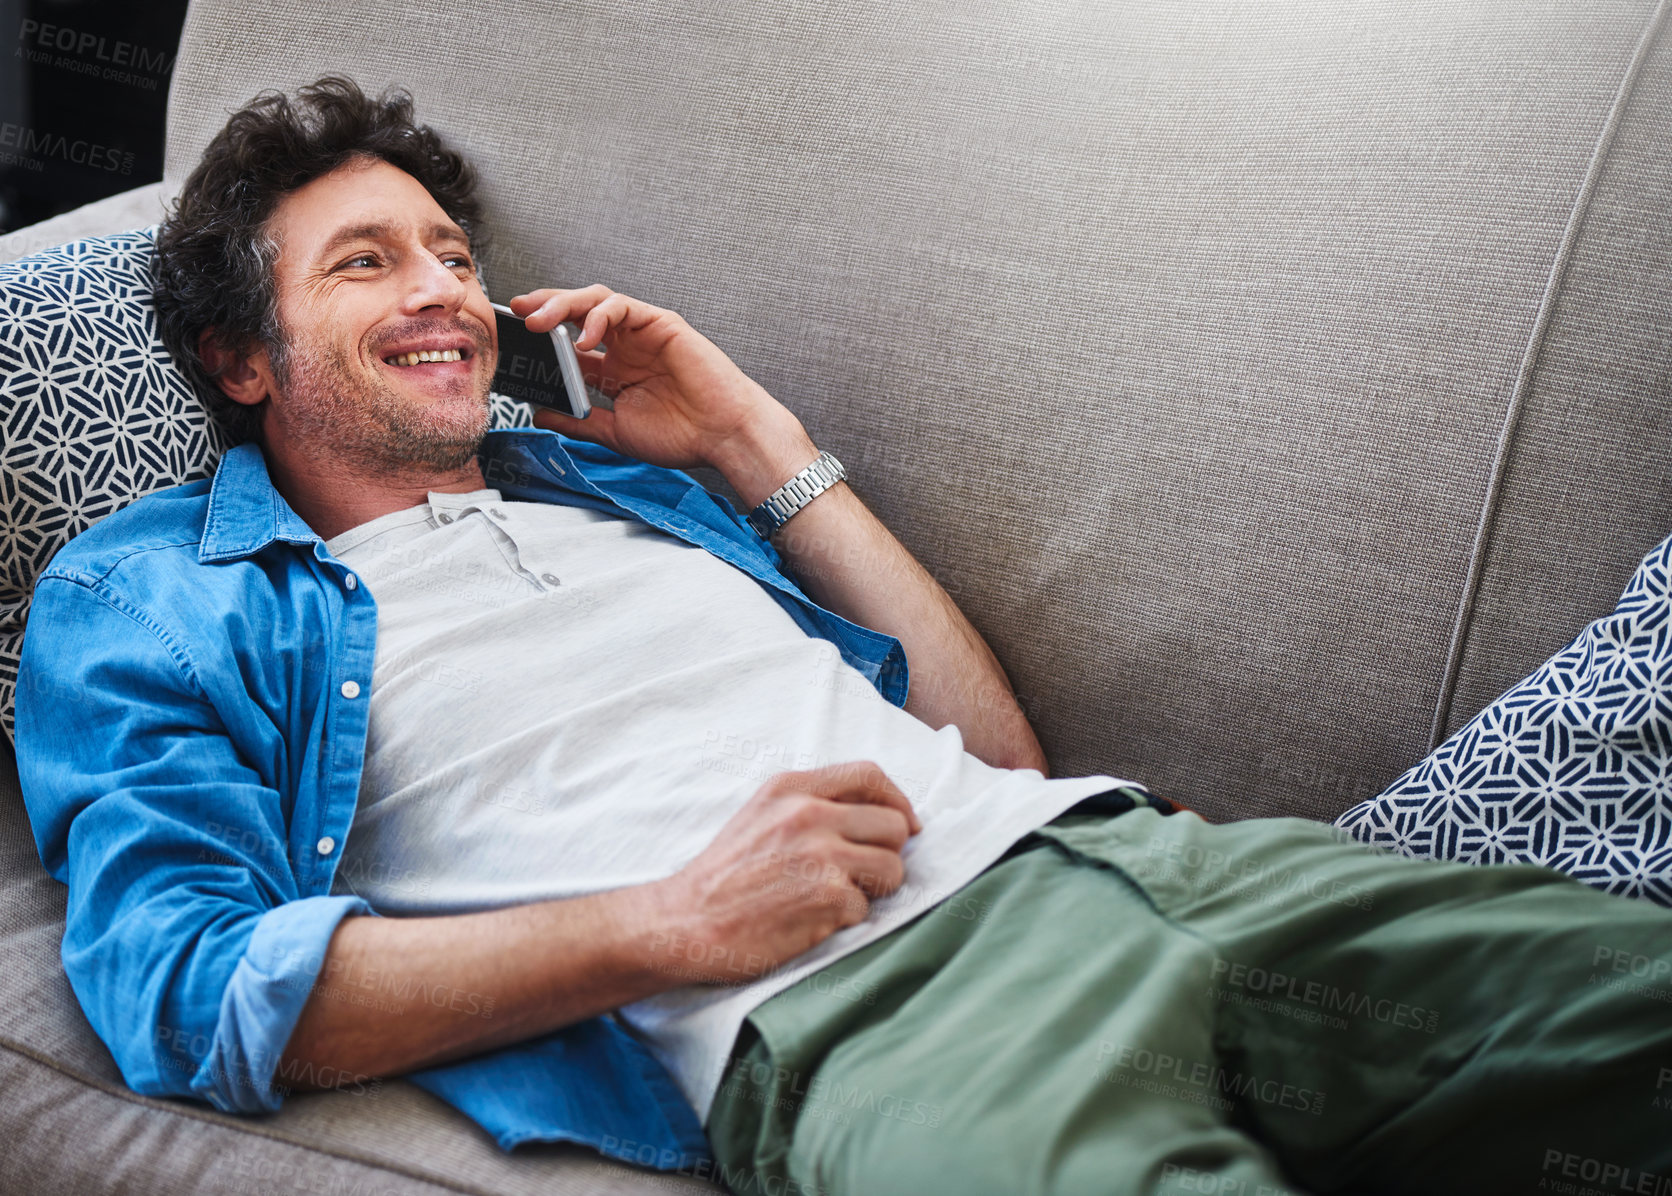 Buy stock photo Shot of a happy bachelor answering his cellphone while relaxing on the couch at home